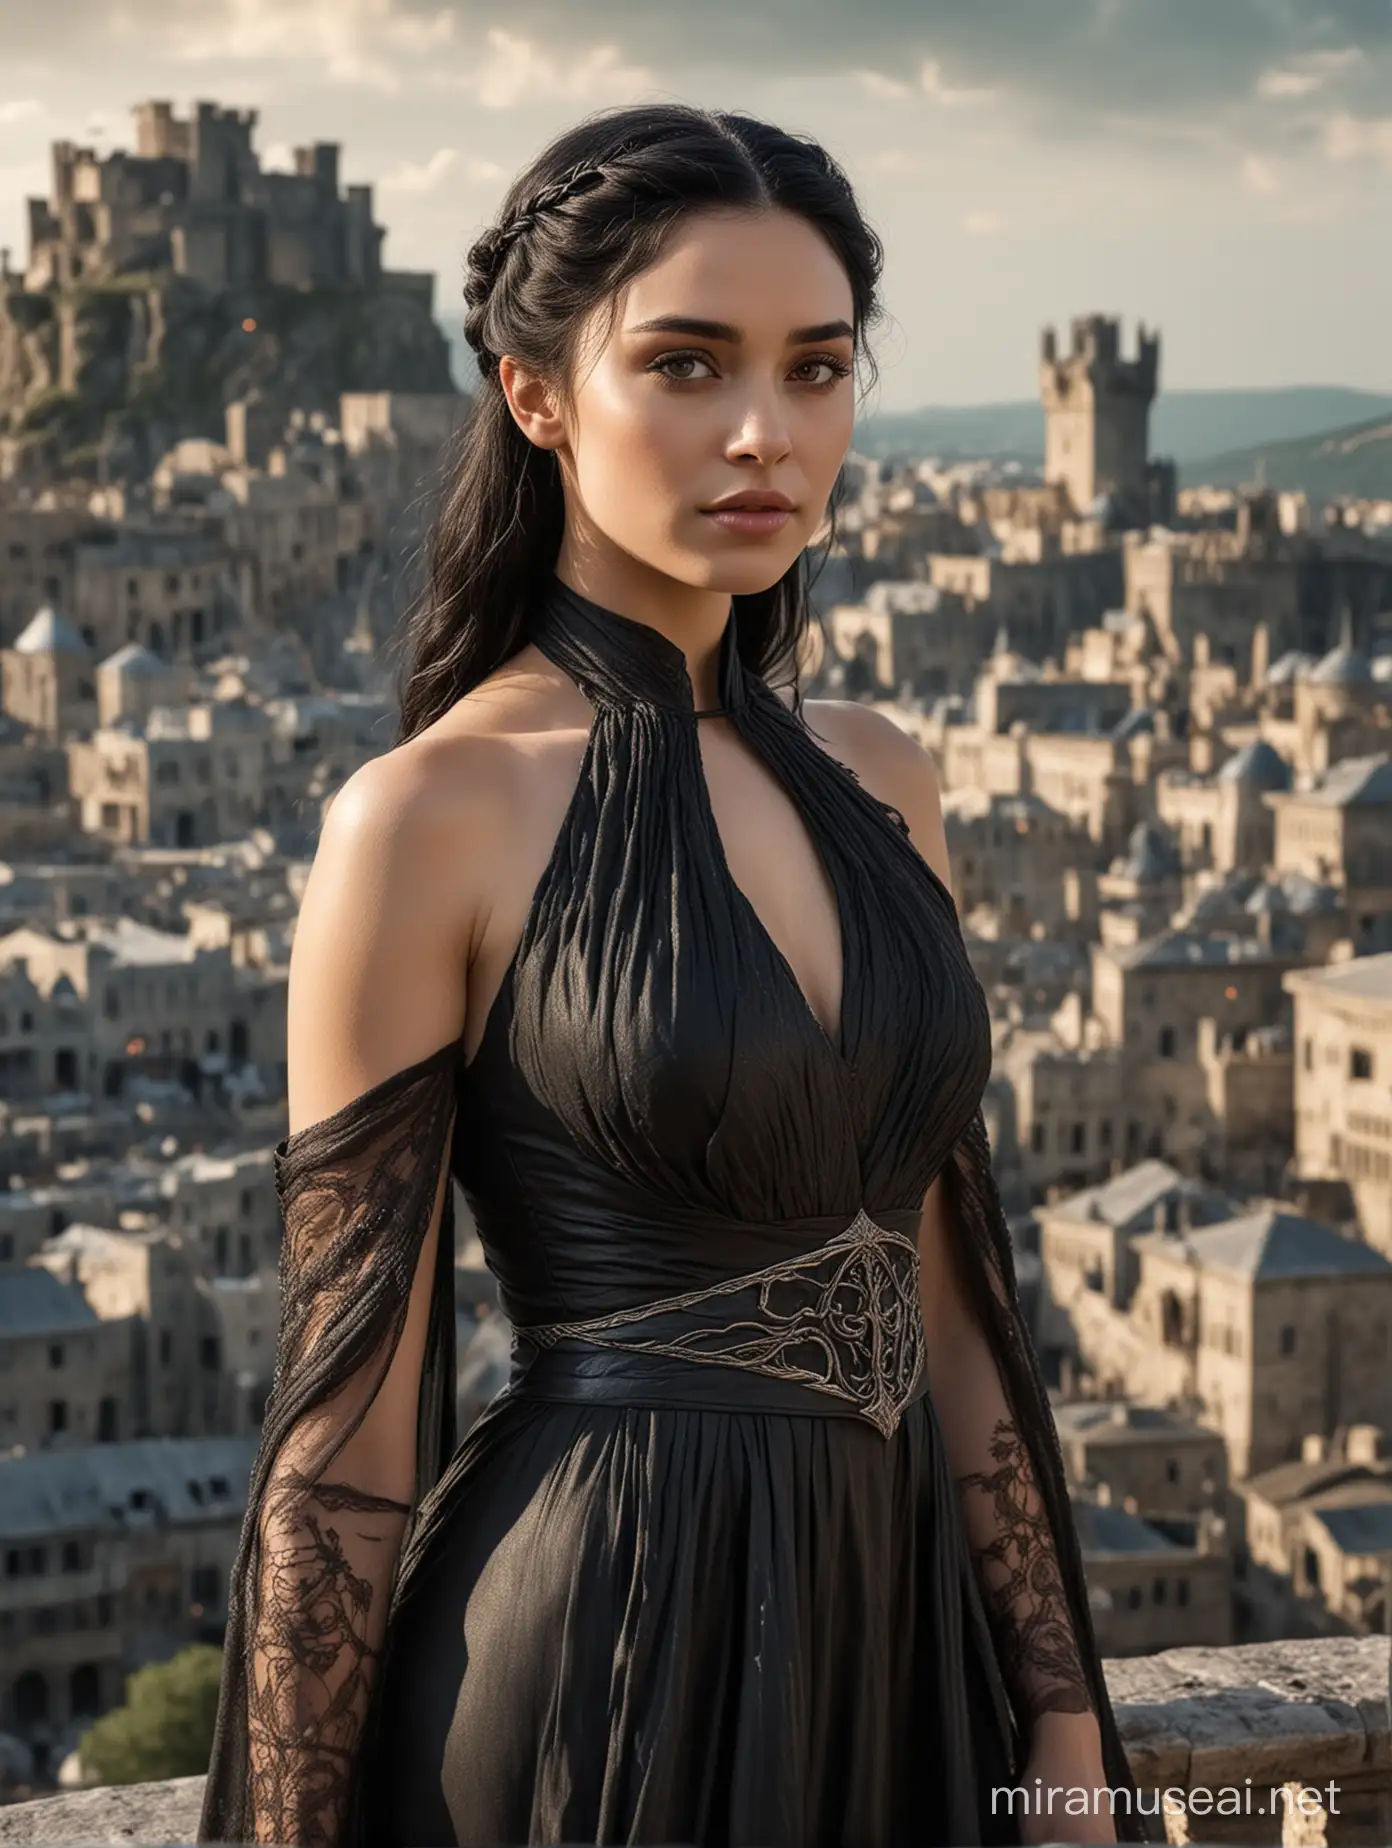 Valyrian Woman in Black Gown Amidst Ancient Cityscape